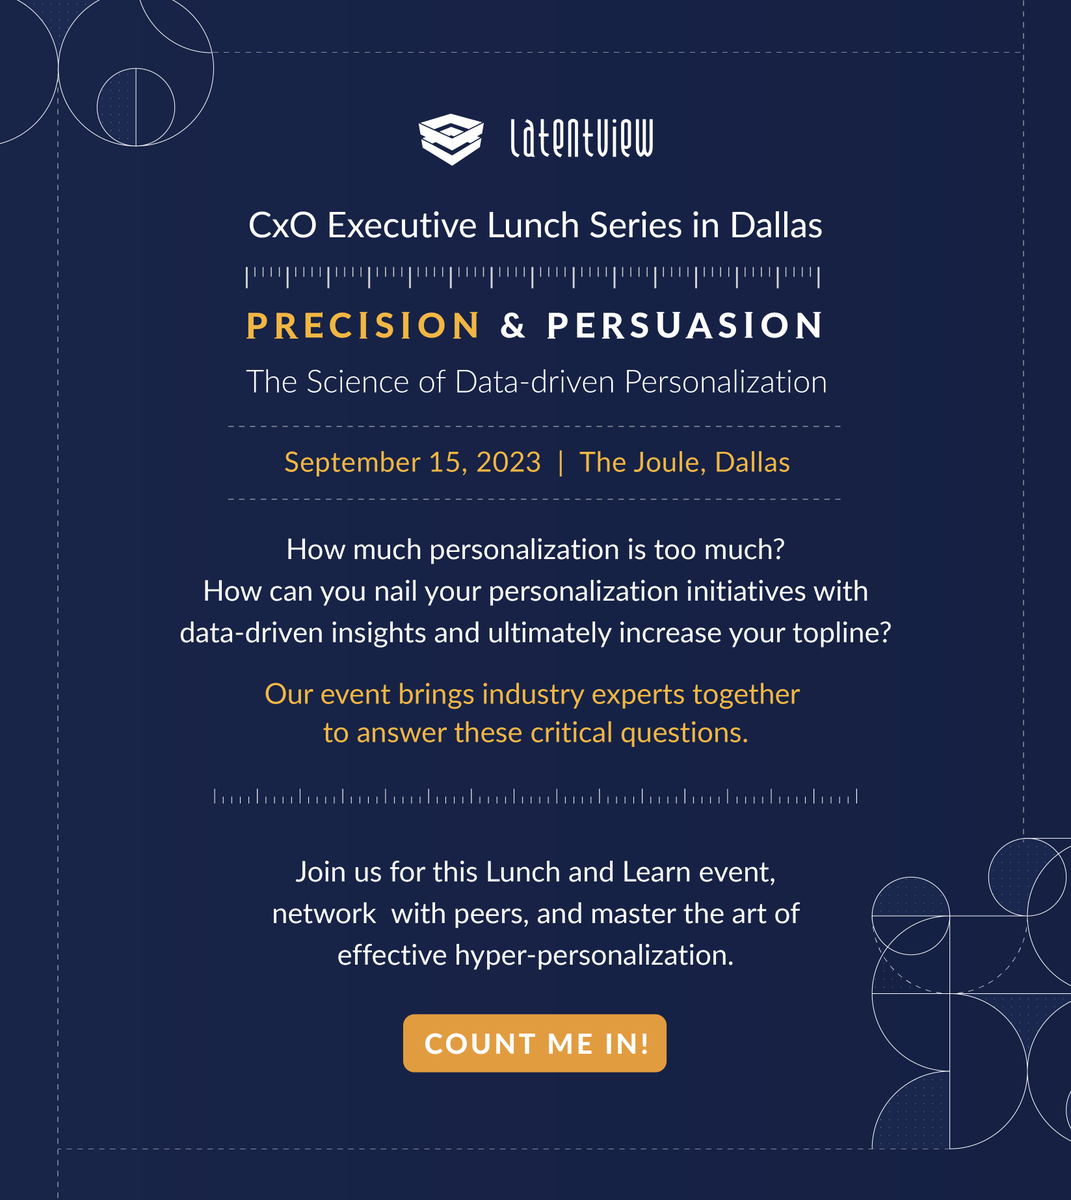 Personalization is significant to building loyal customers, but many business executives still struggle to hit the “Personalization Sweet Spot”. Learn, network, and master the art of effective hyper-personalization. Register for our lunch and learn event:latentviewanalytics.com/cxo-executive-…